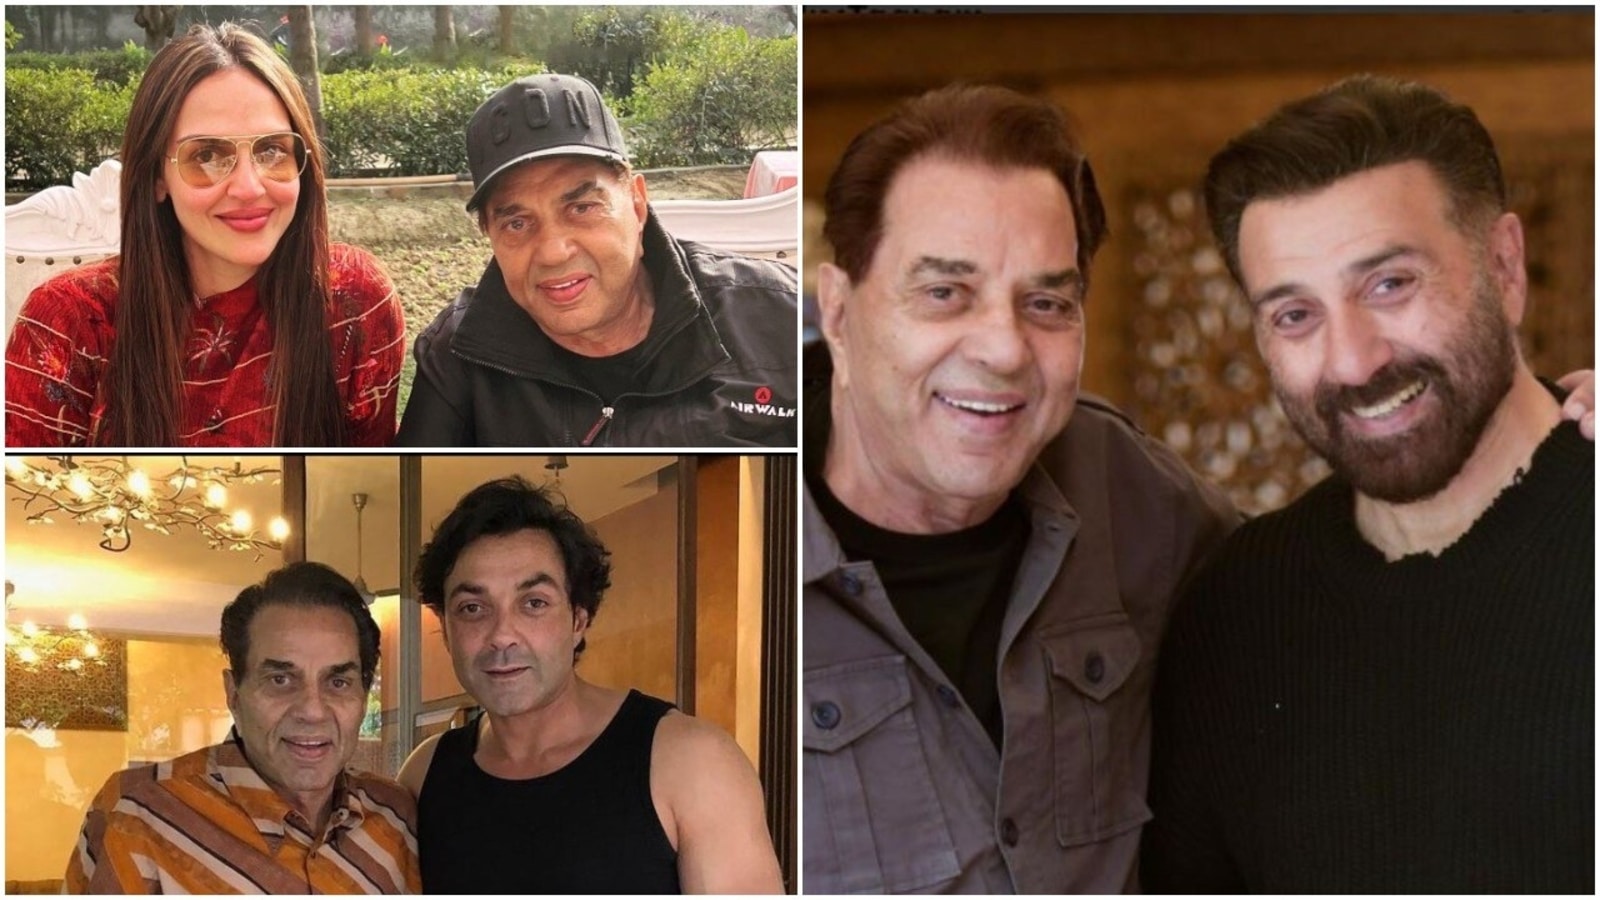 Sunny Deol Xnx Video - Sunny Deol, Bobby Deol post pics with dad Dharmendra to wish him on his  birthday: 'So blessed to be your son' | Bollywood - Hindustan Times